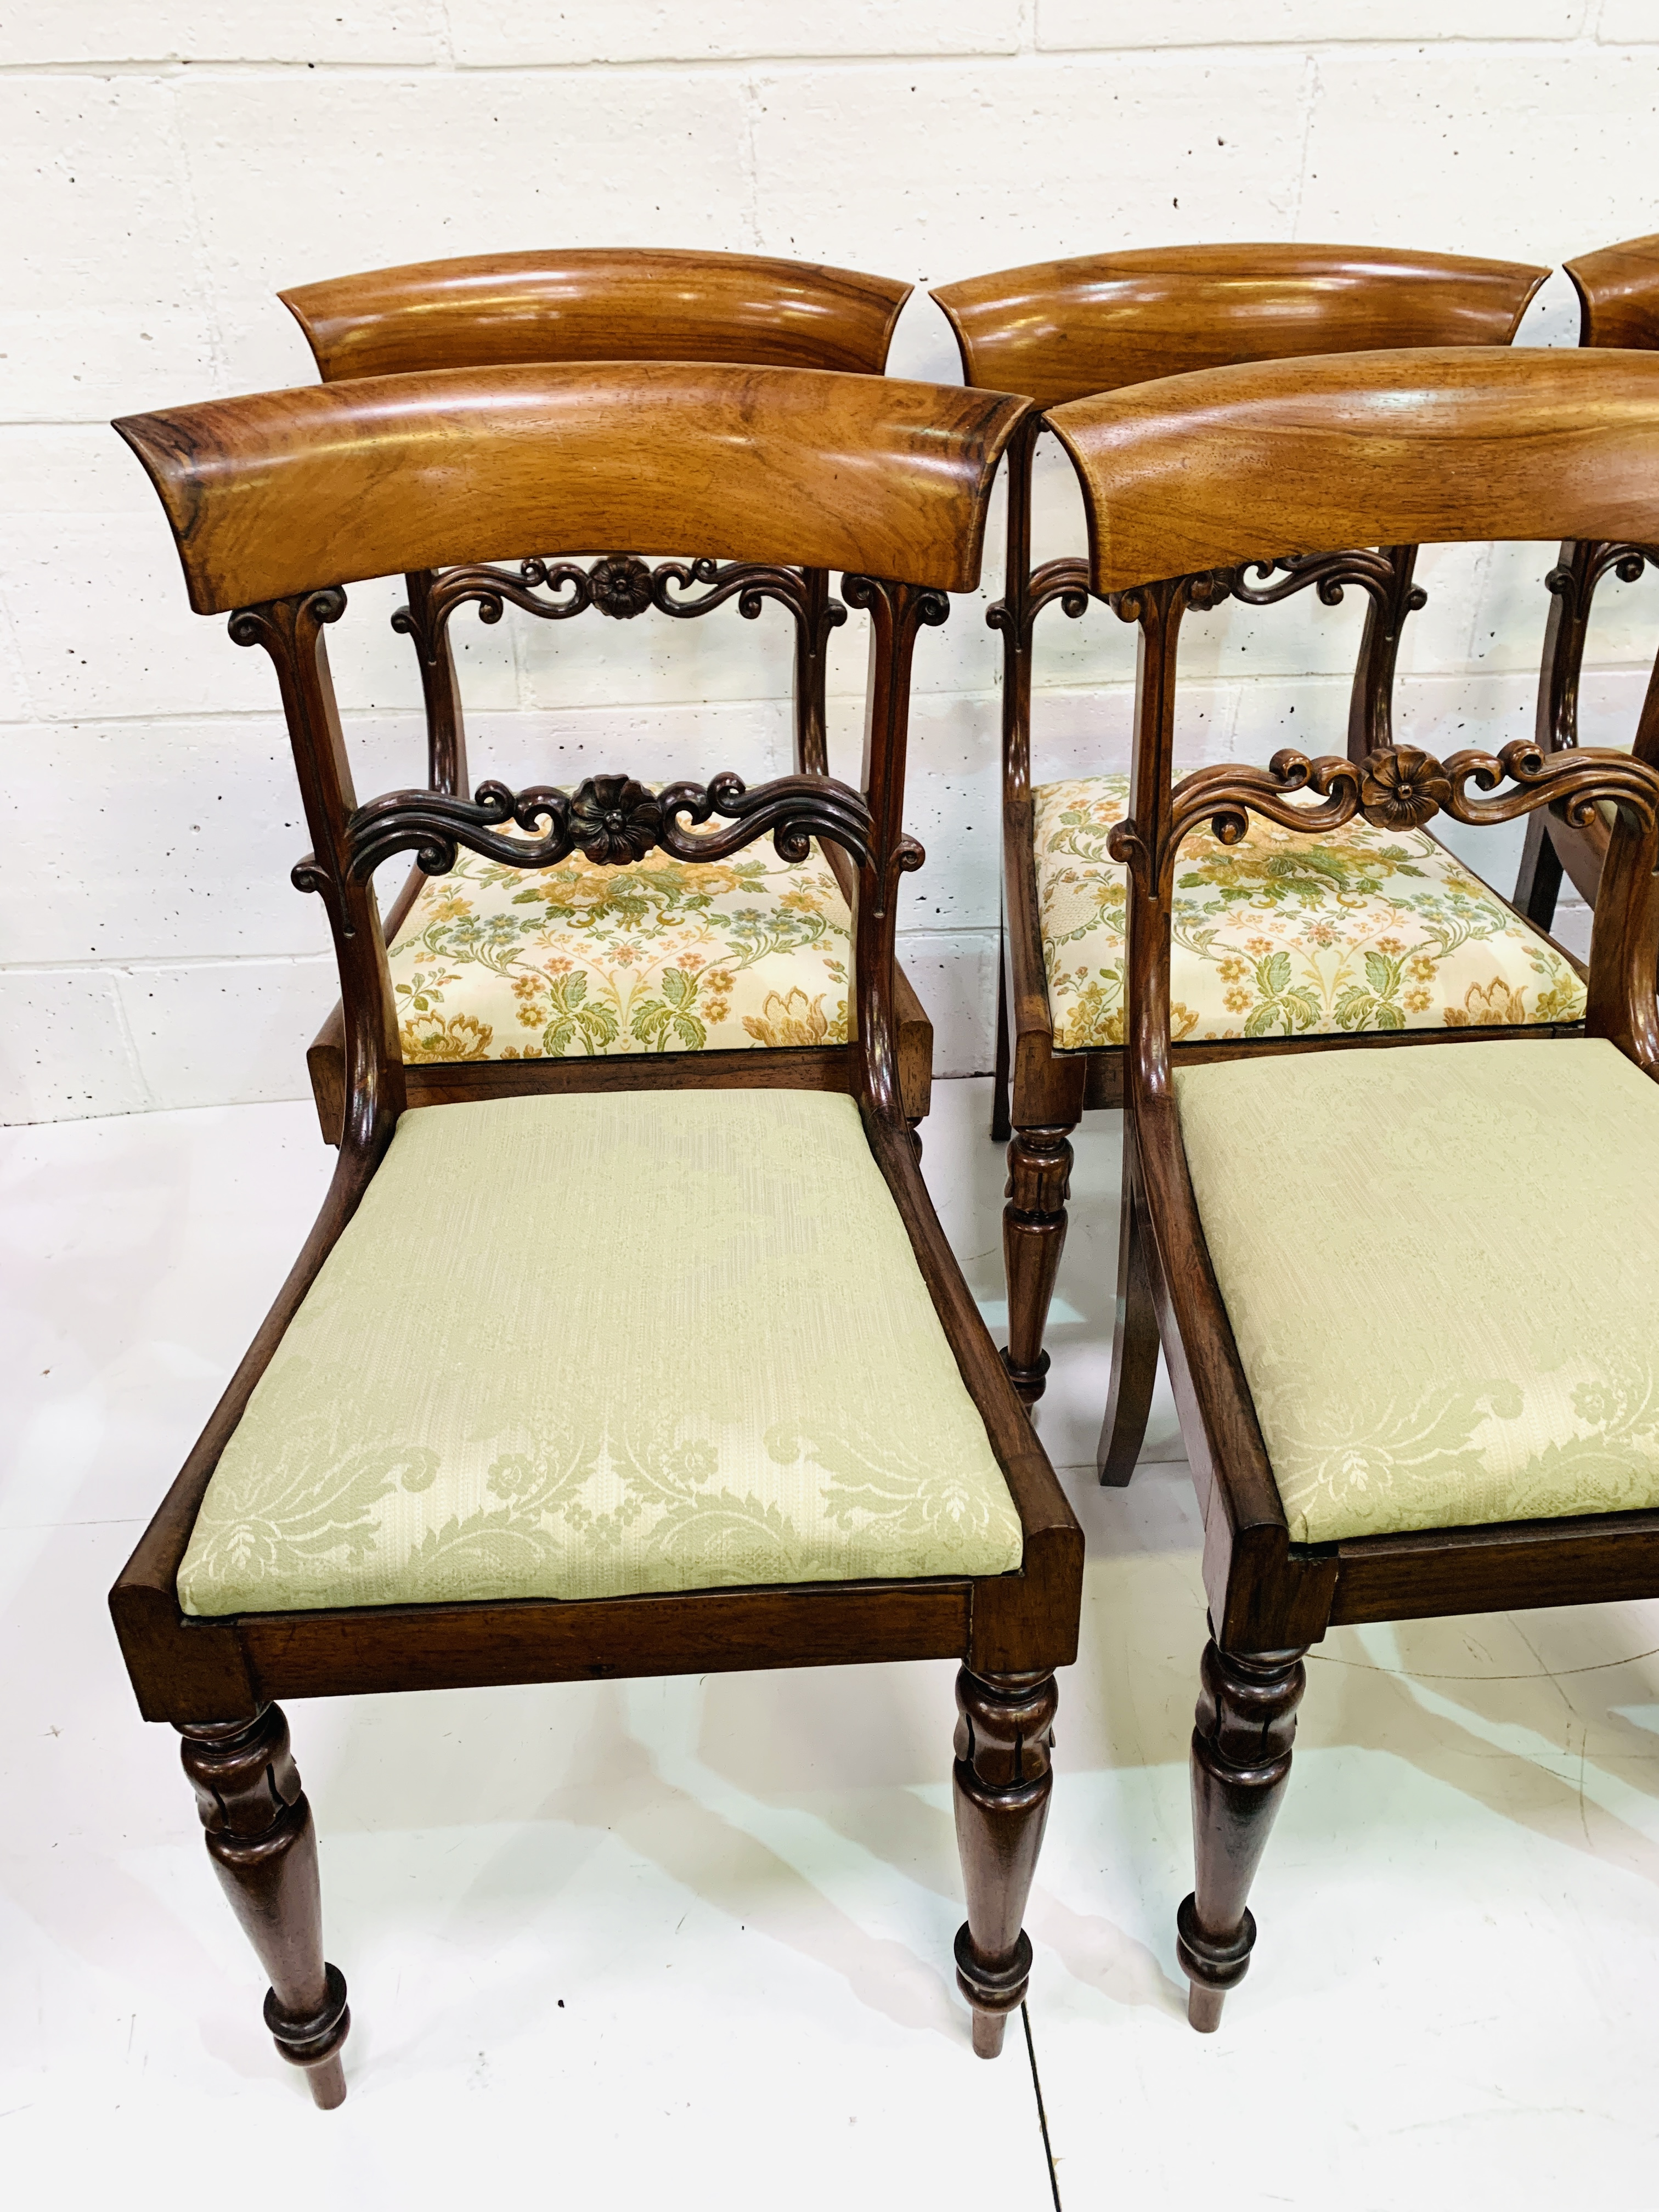 Six mid-19th century mahogany dining chairs - Image 2 of 5